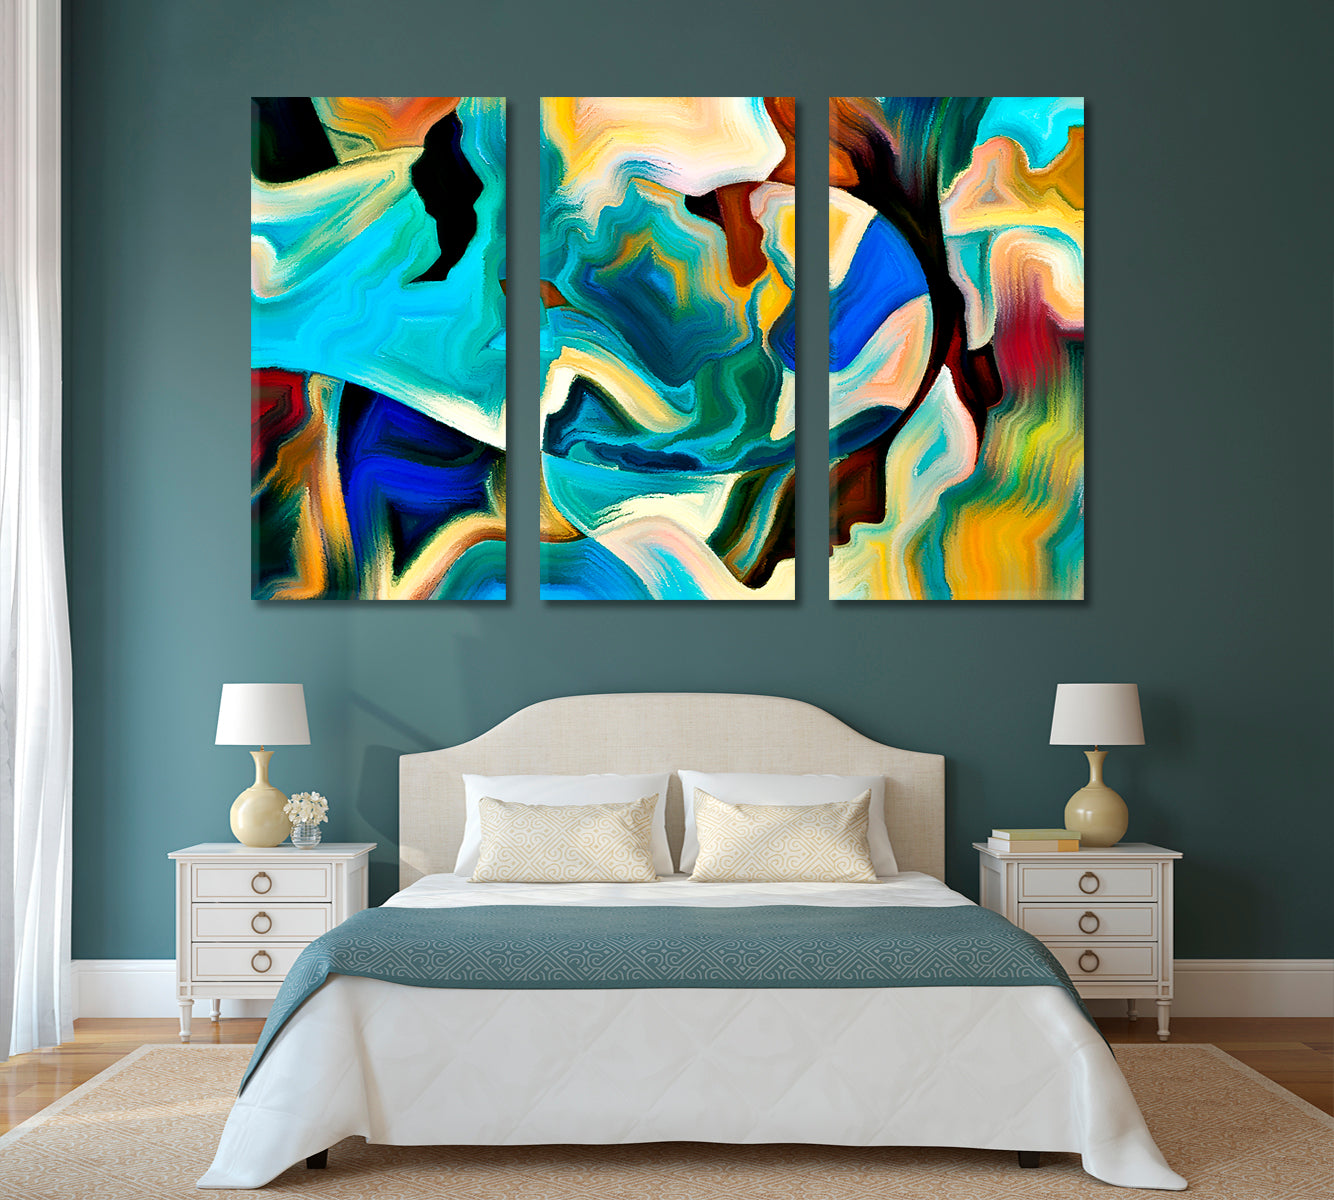 Sacred Reality Abstraction, Human Profiles Lines Colors And Shapes Abstract Art Print Artesty 3 panels 36" x 24" 